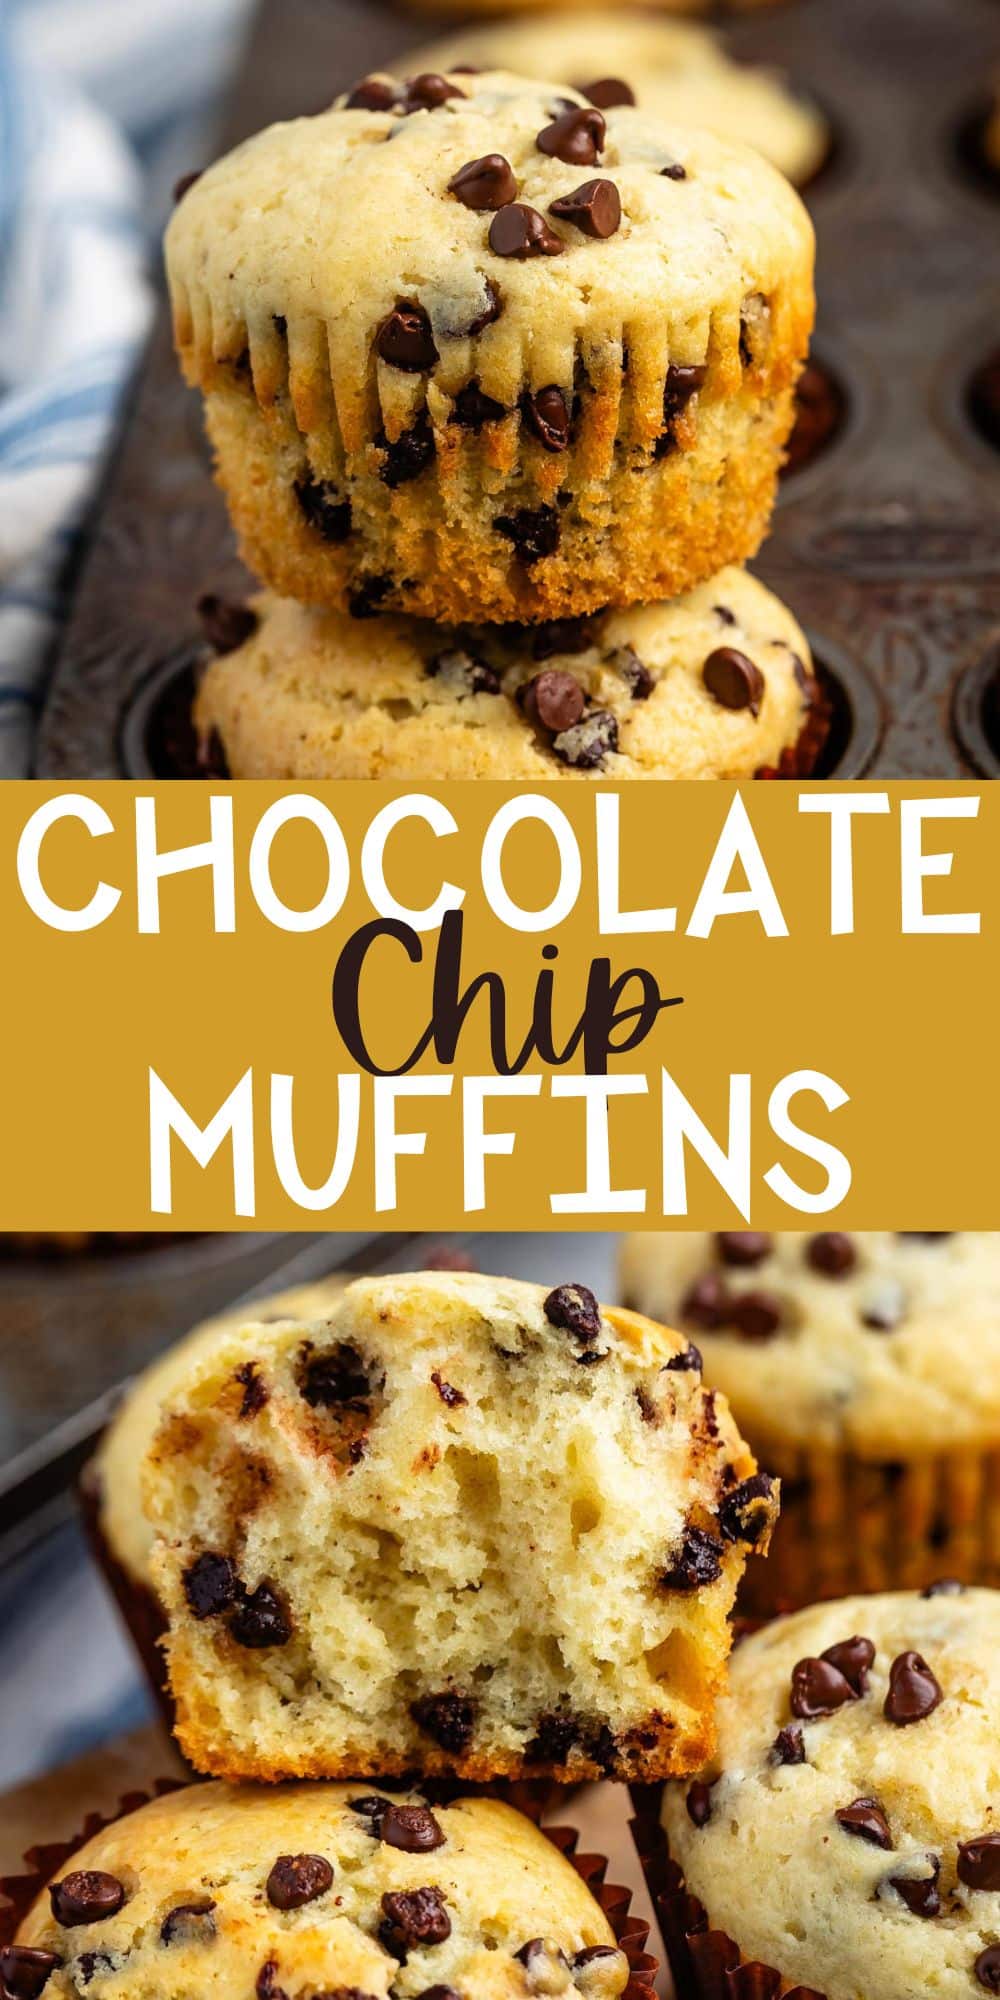 two photos of stacked muffins in the baking pan with mini chocolate chips baked in with words on the image.